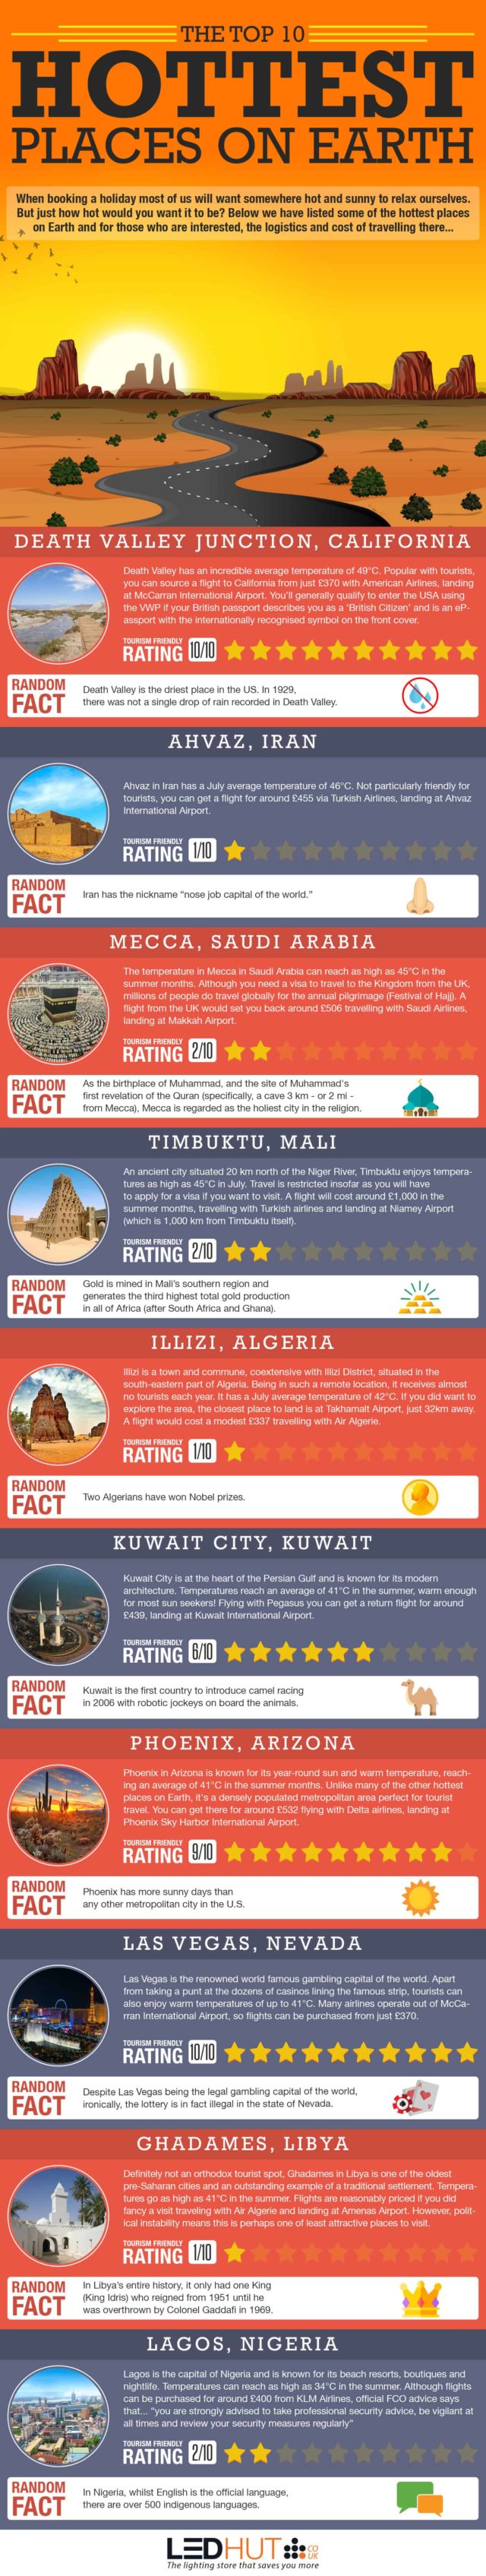 The Top 10 Hottest Places On Earth